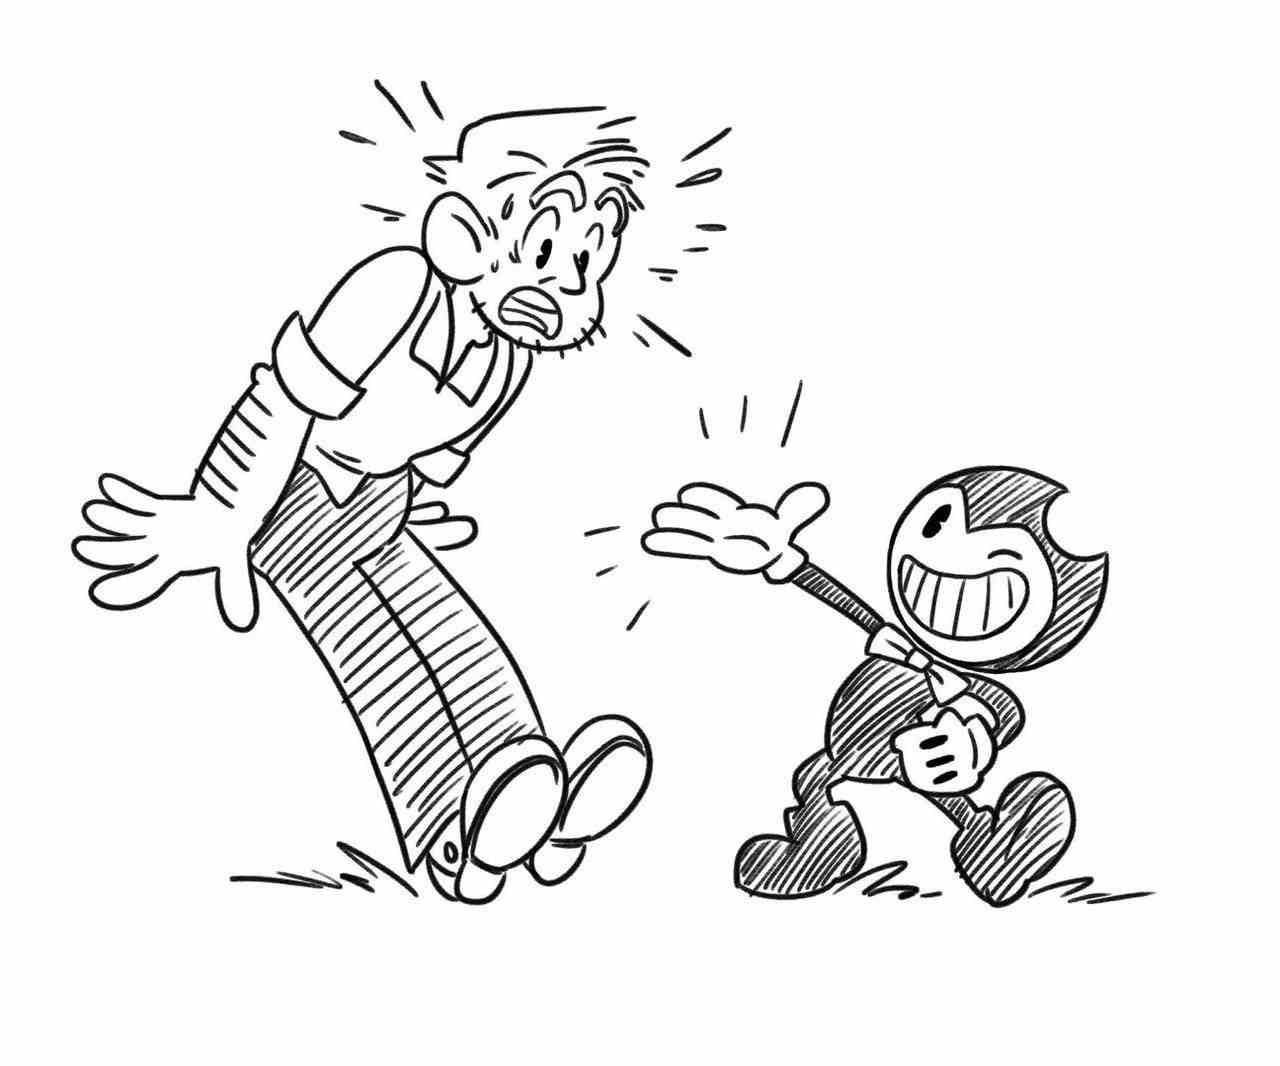 The man surprises when talking to Bendy from Bendy and the Ink Machine from Bendy